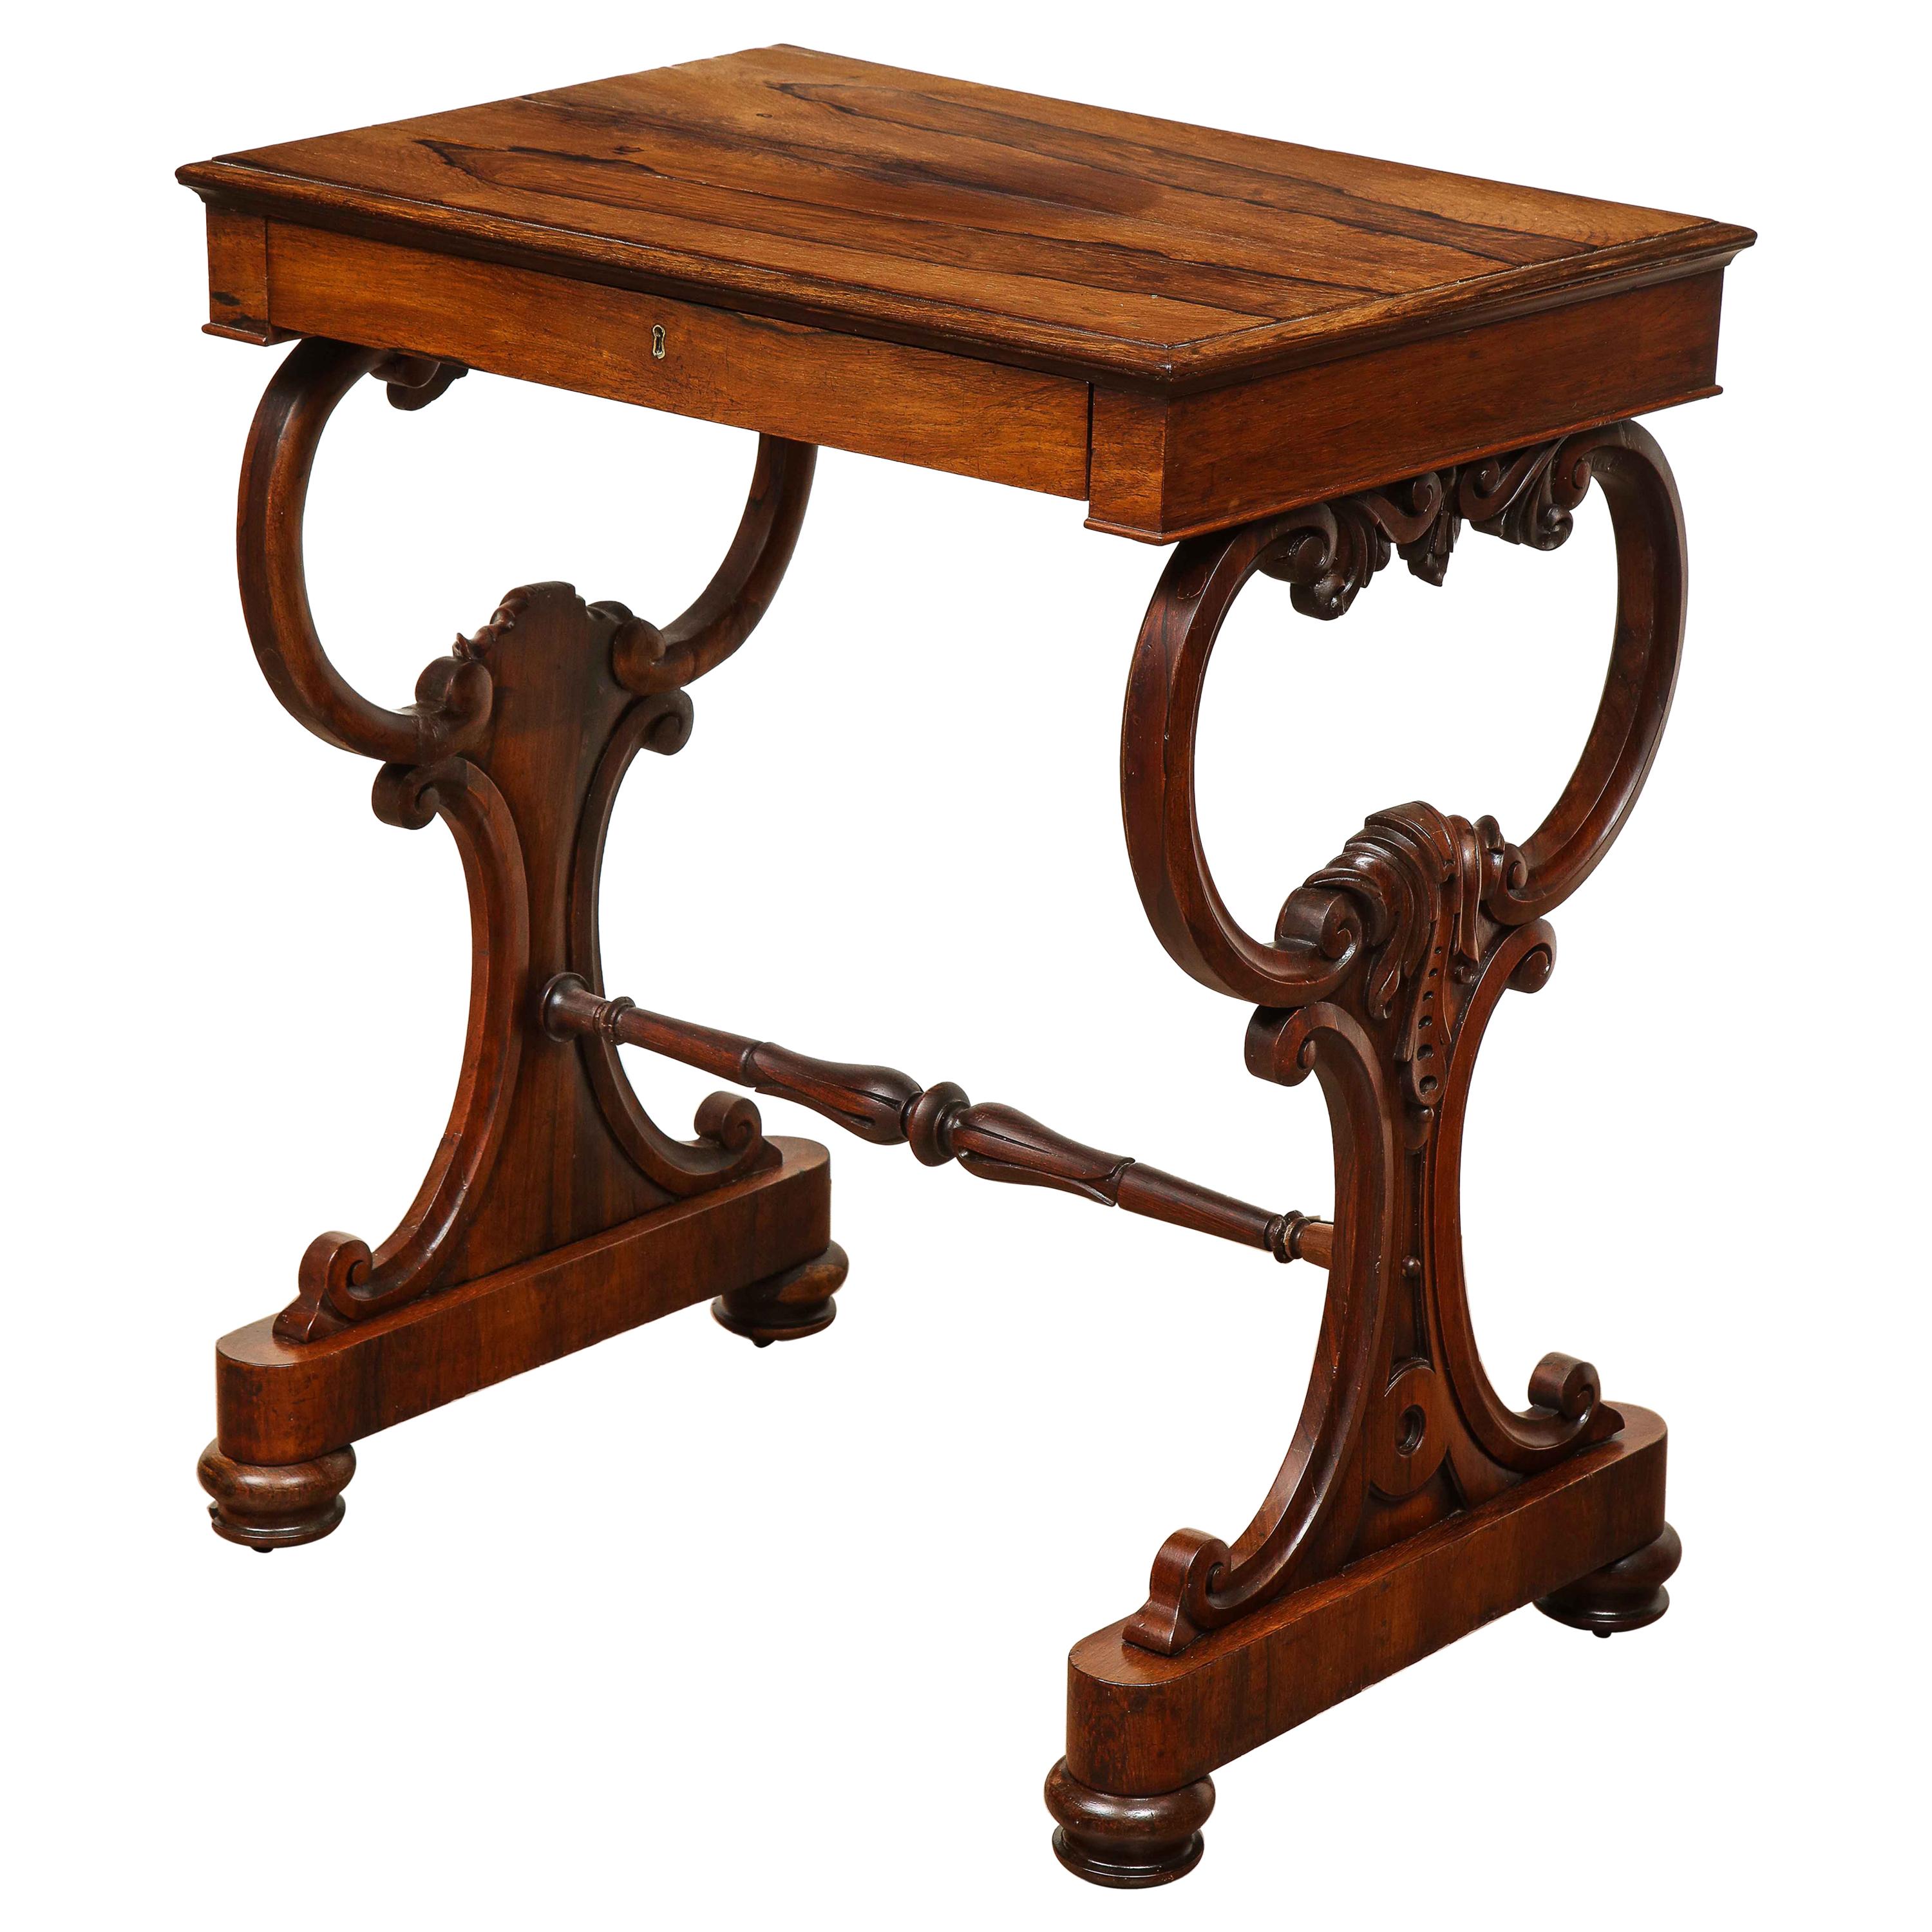 Mid-19th Century English Work Table with Drawer and Fitment For Sale